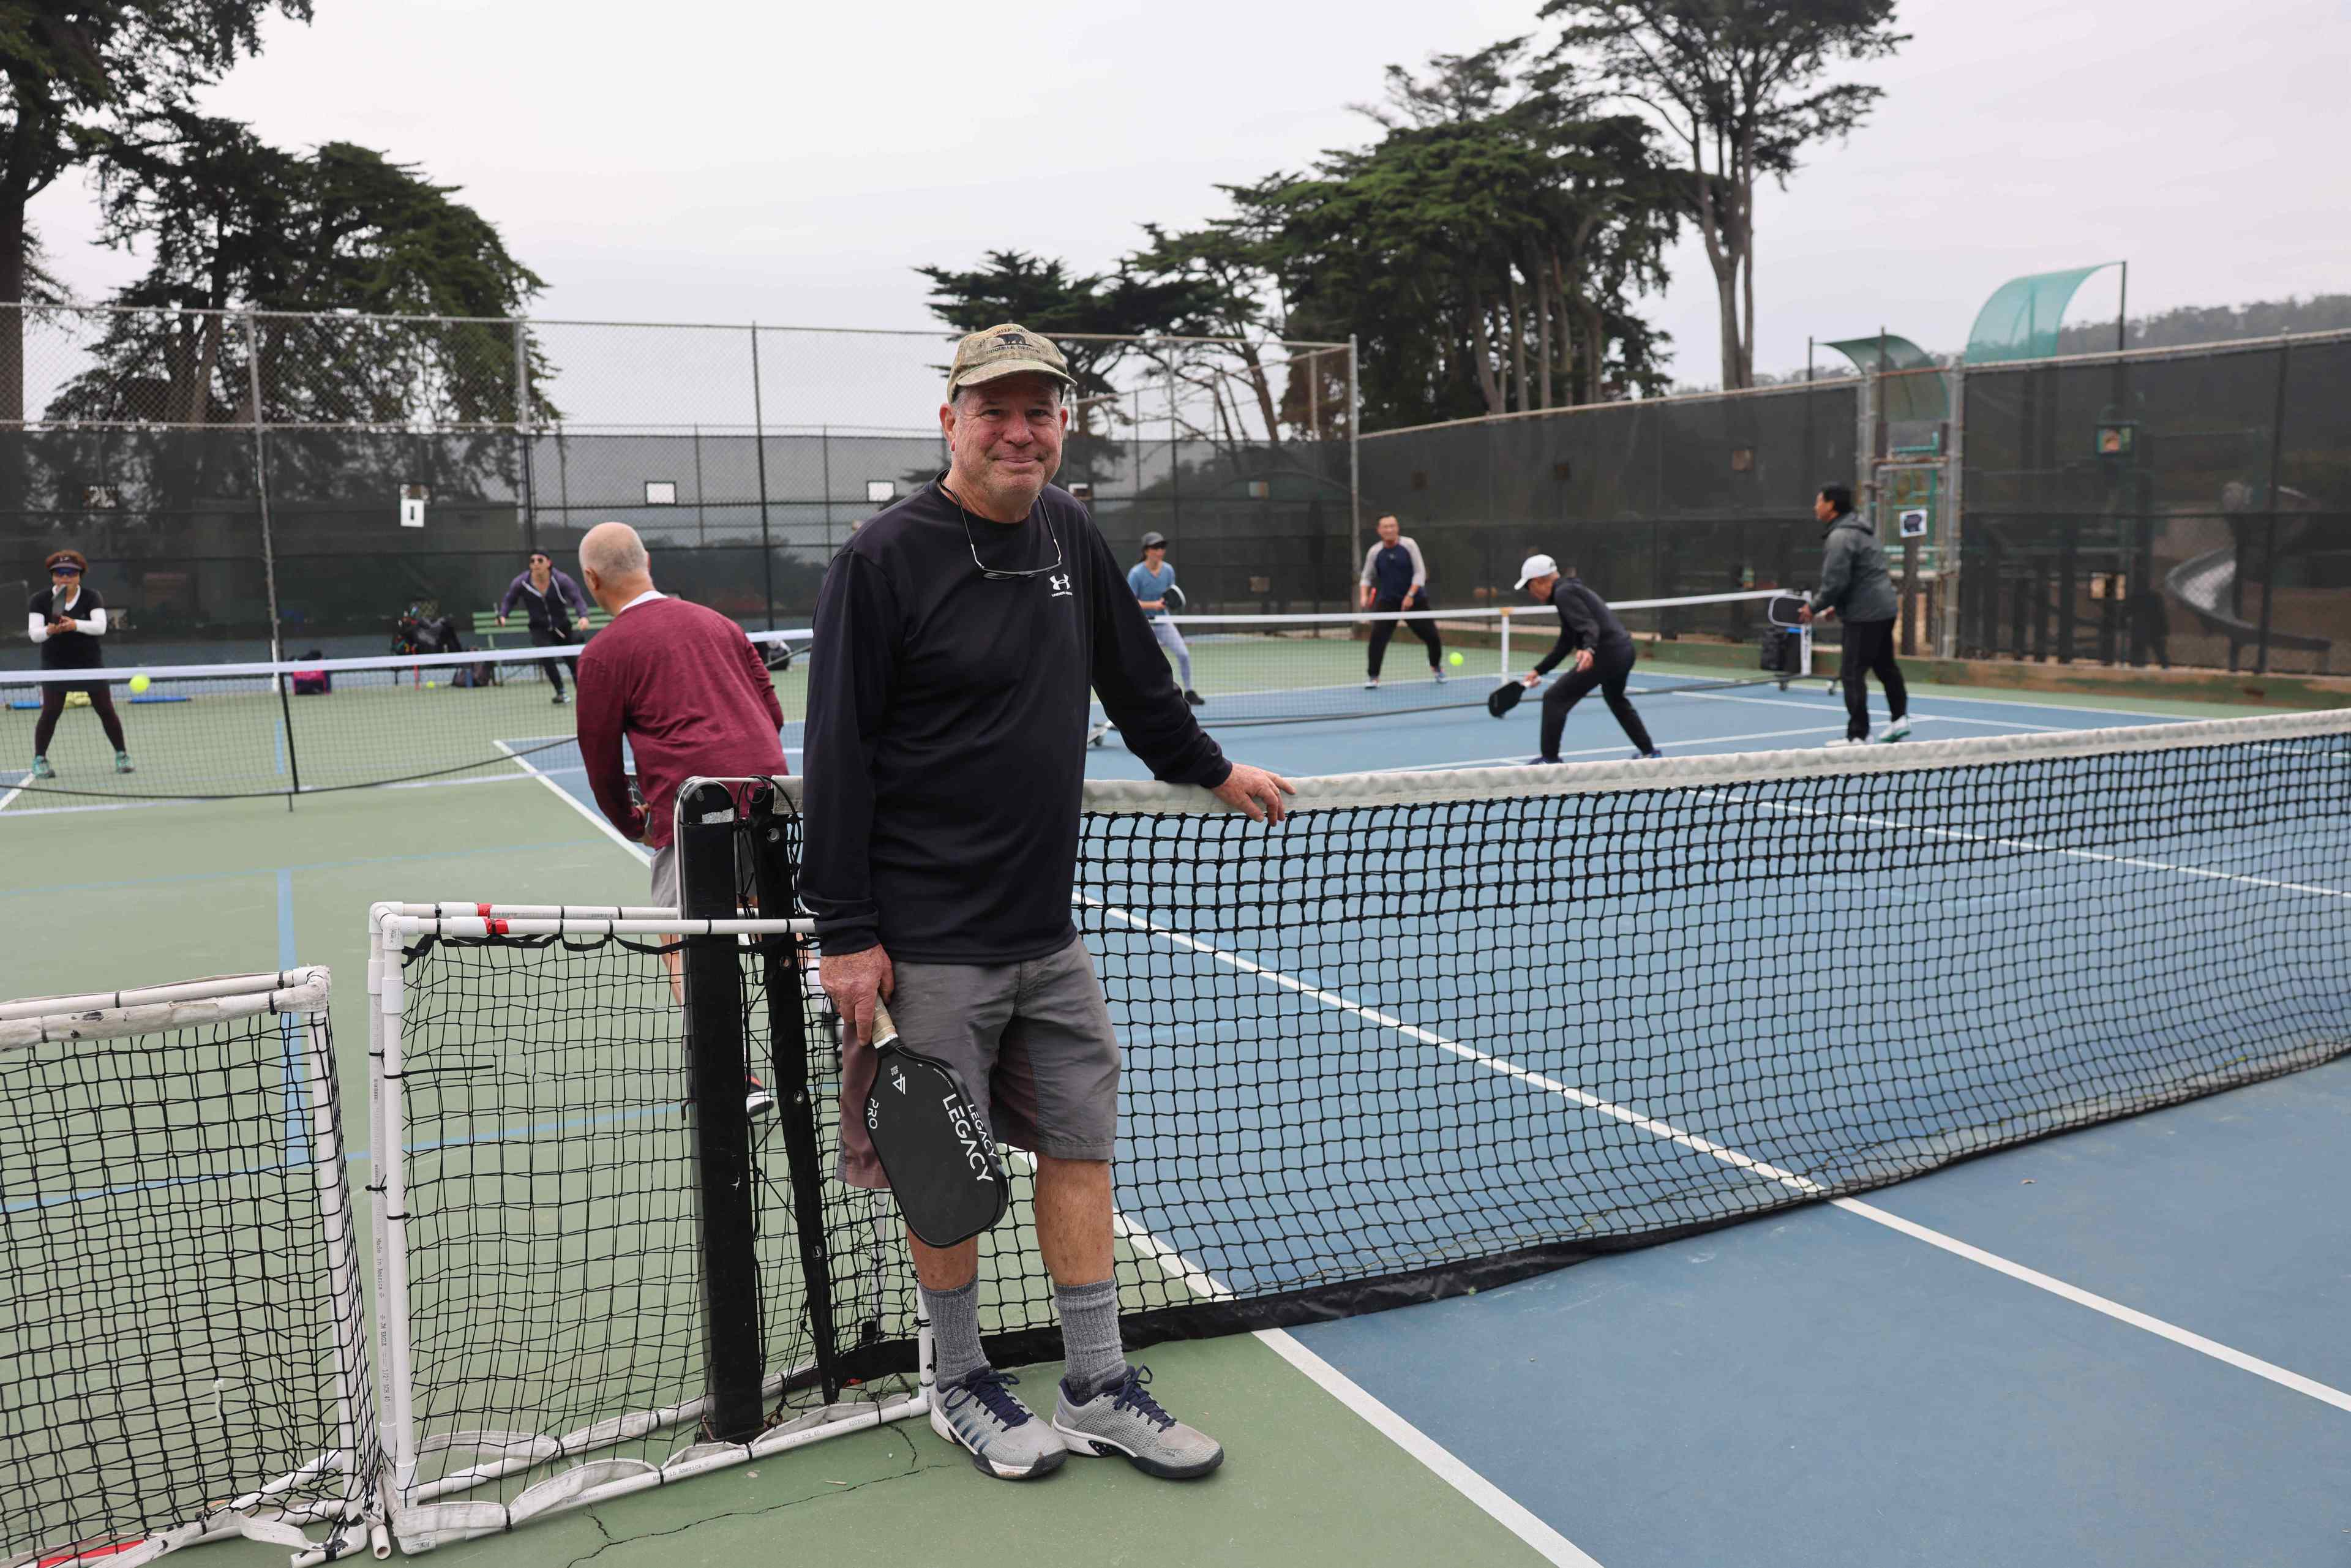 A man stands smiling by a pickleball net, holding a paddle, with others playing in the background on the court.